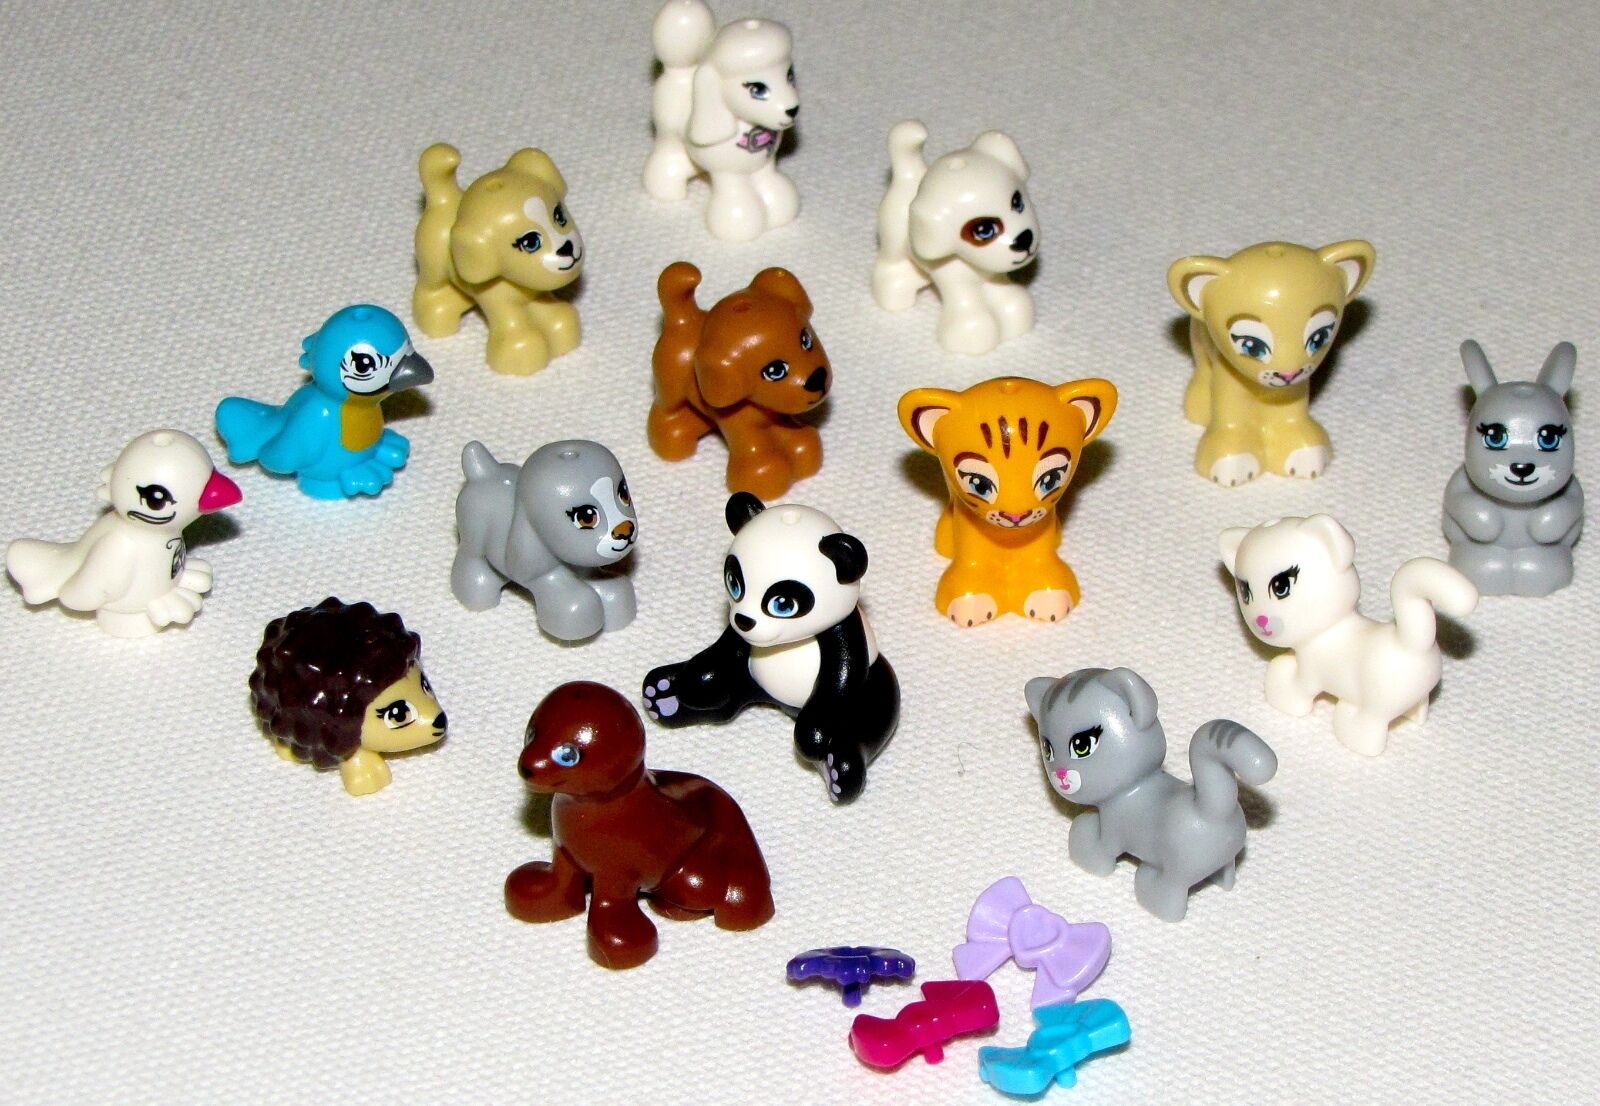 Lego New Friends Animals Puppy Dog Bunny Hedgehog Pets You Pick Which Animals